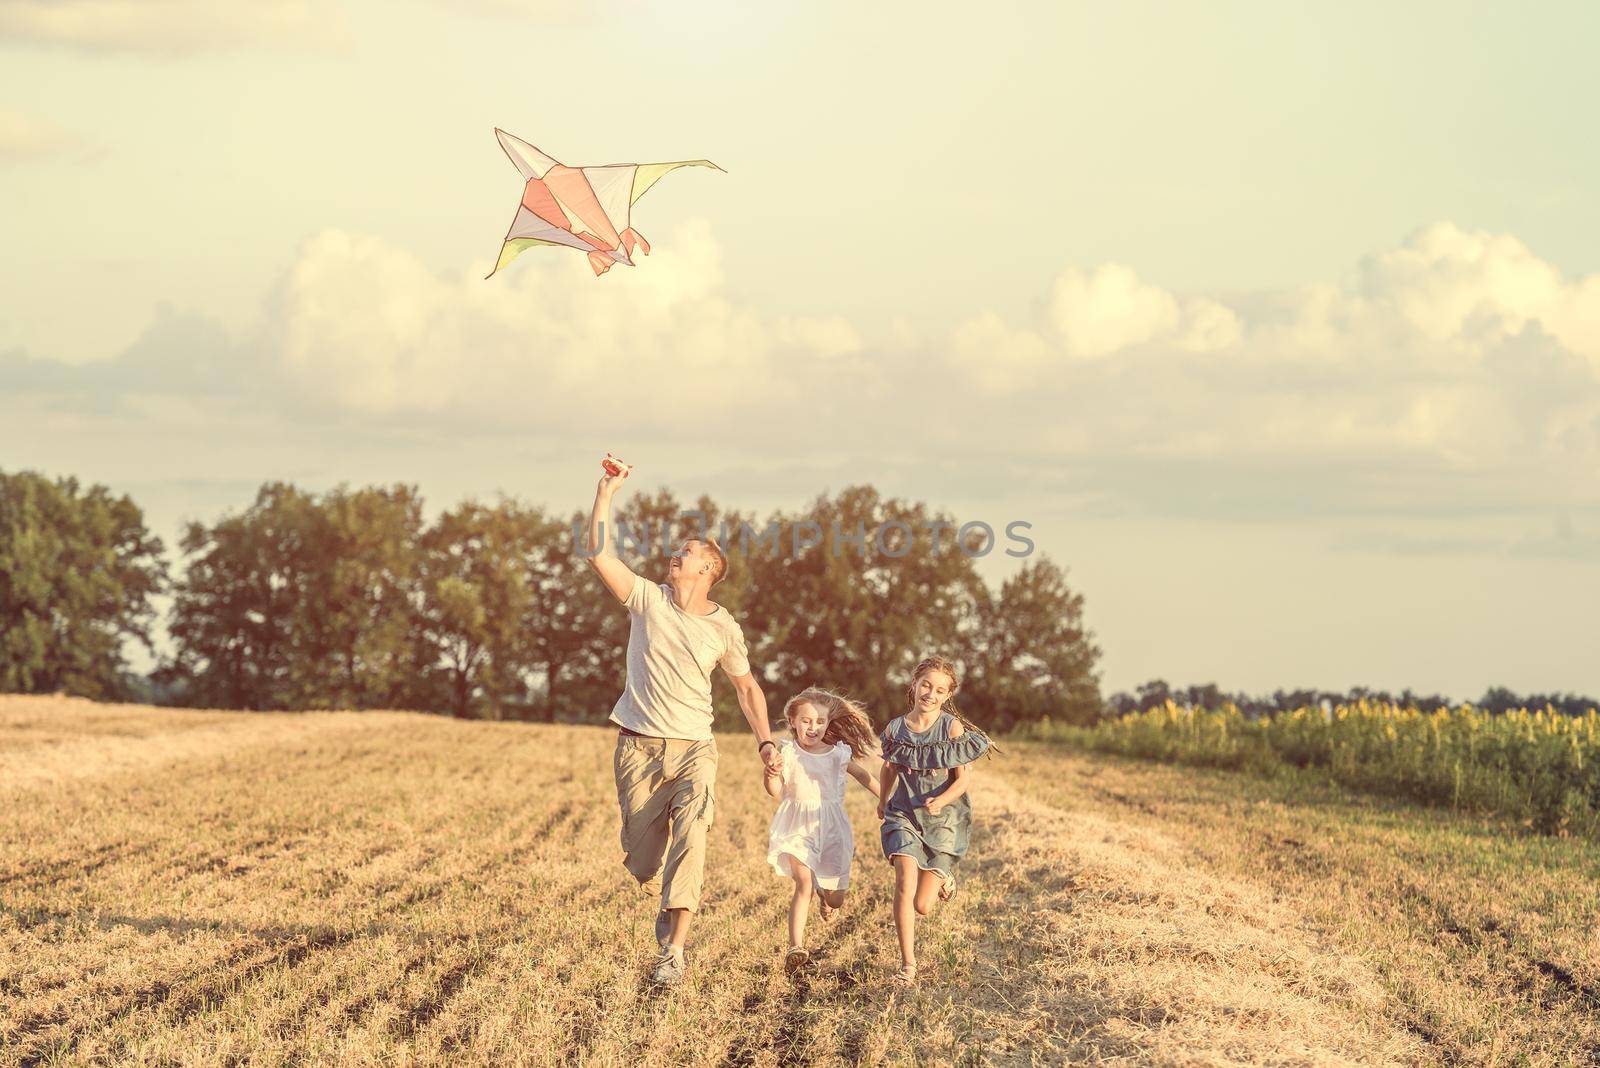 Dad with his little daughters let a kite in a field